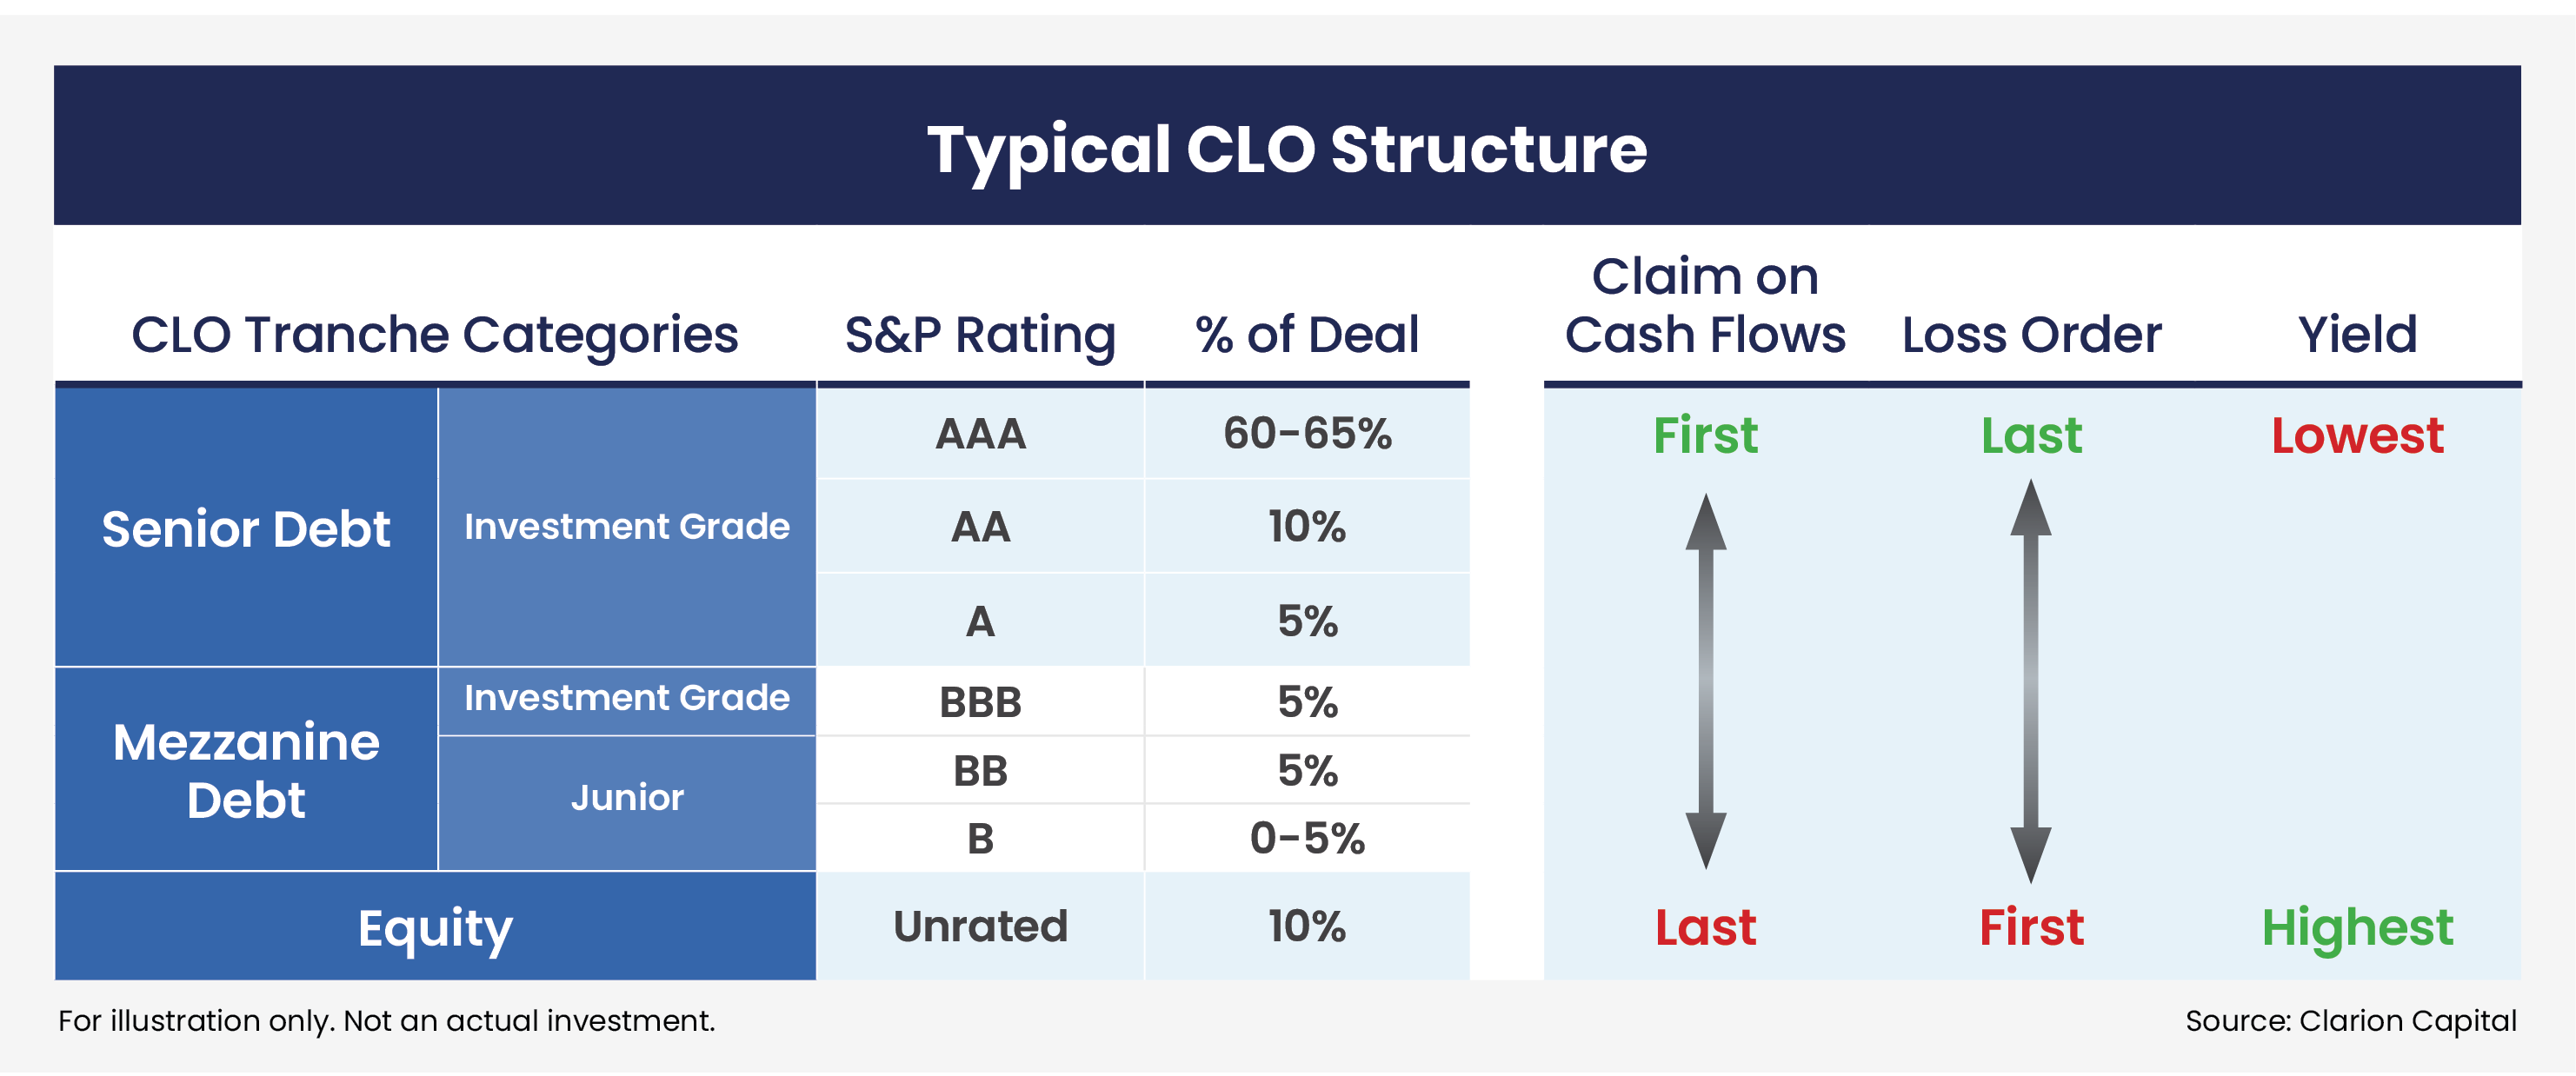 DRAFT - 31742 CP Blog Consideration Typical CLO Structure table